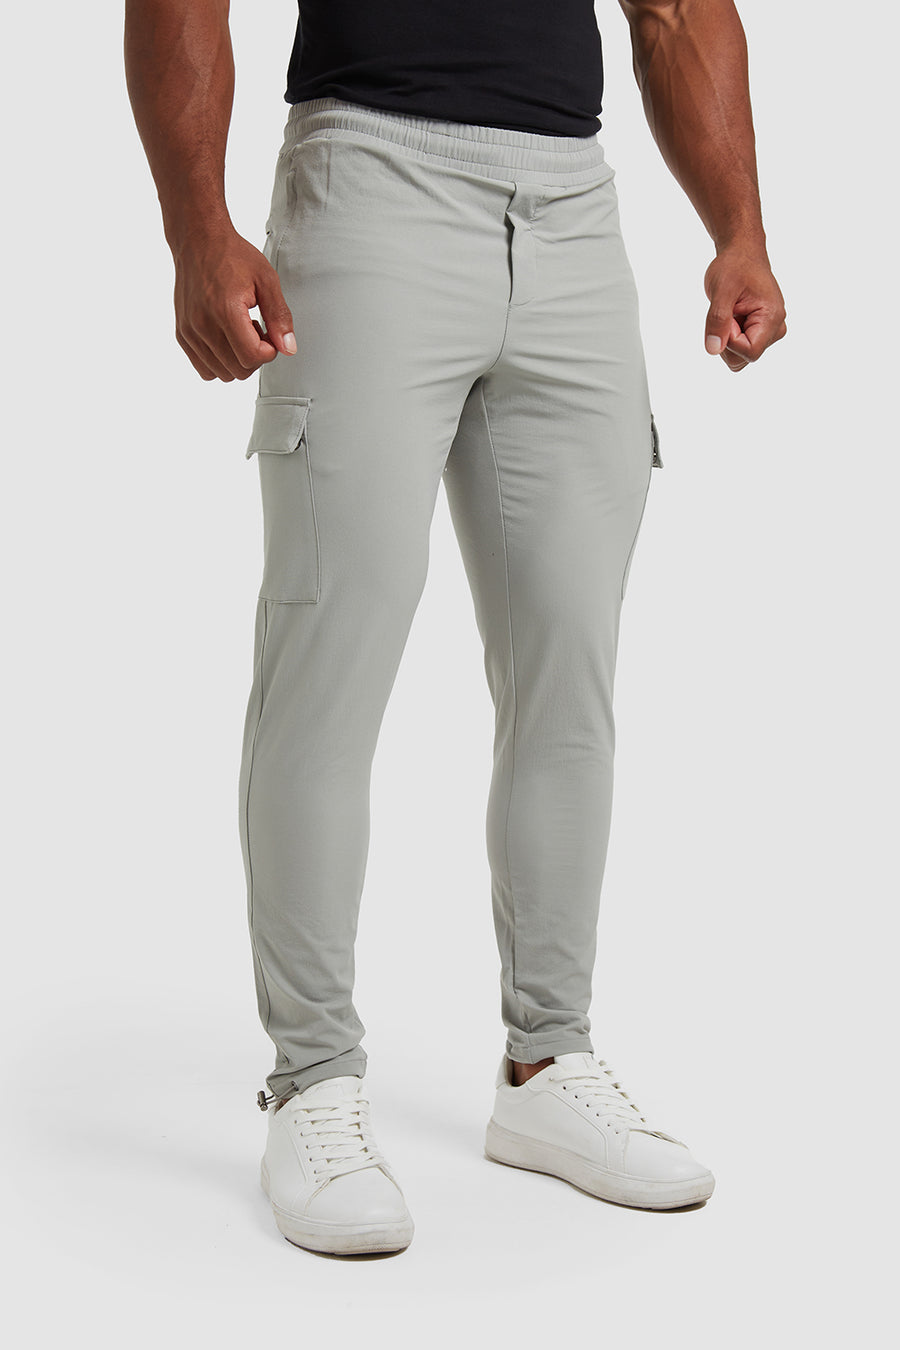 Tech Cargo Pants in Soft Grey - TAILORED ATHLETE - USA